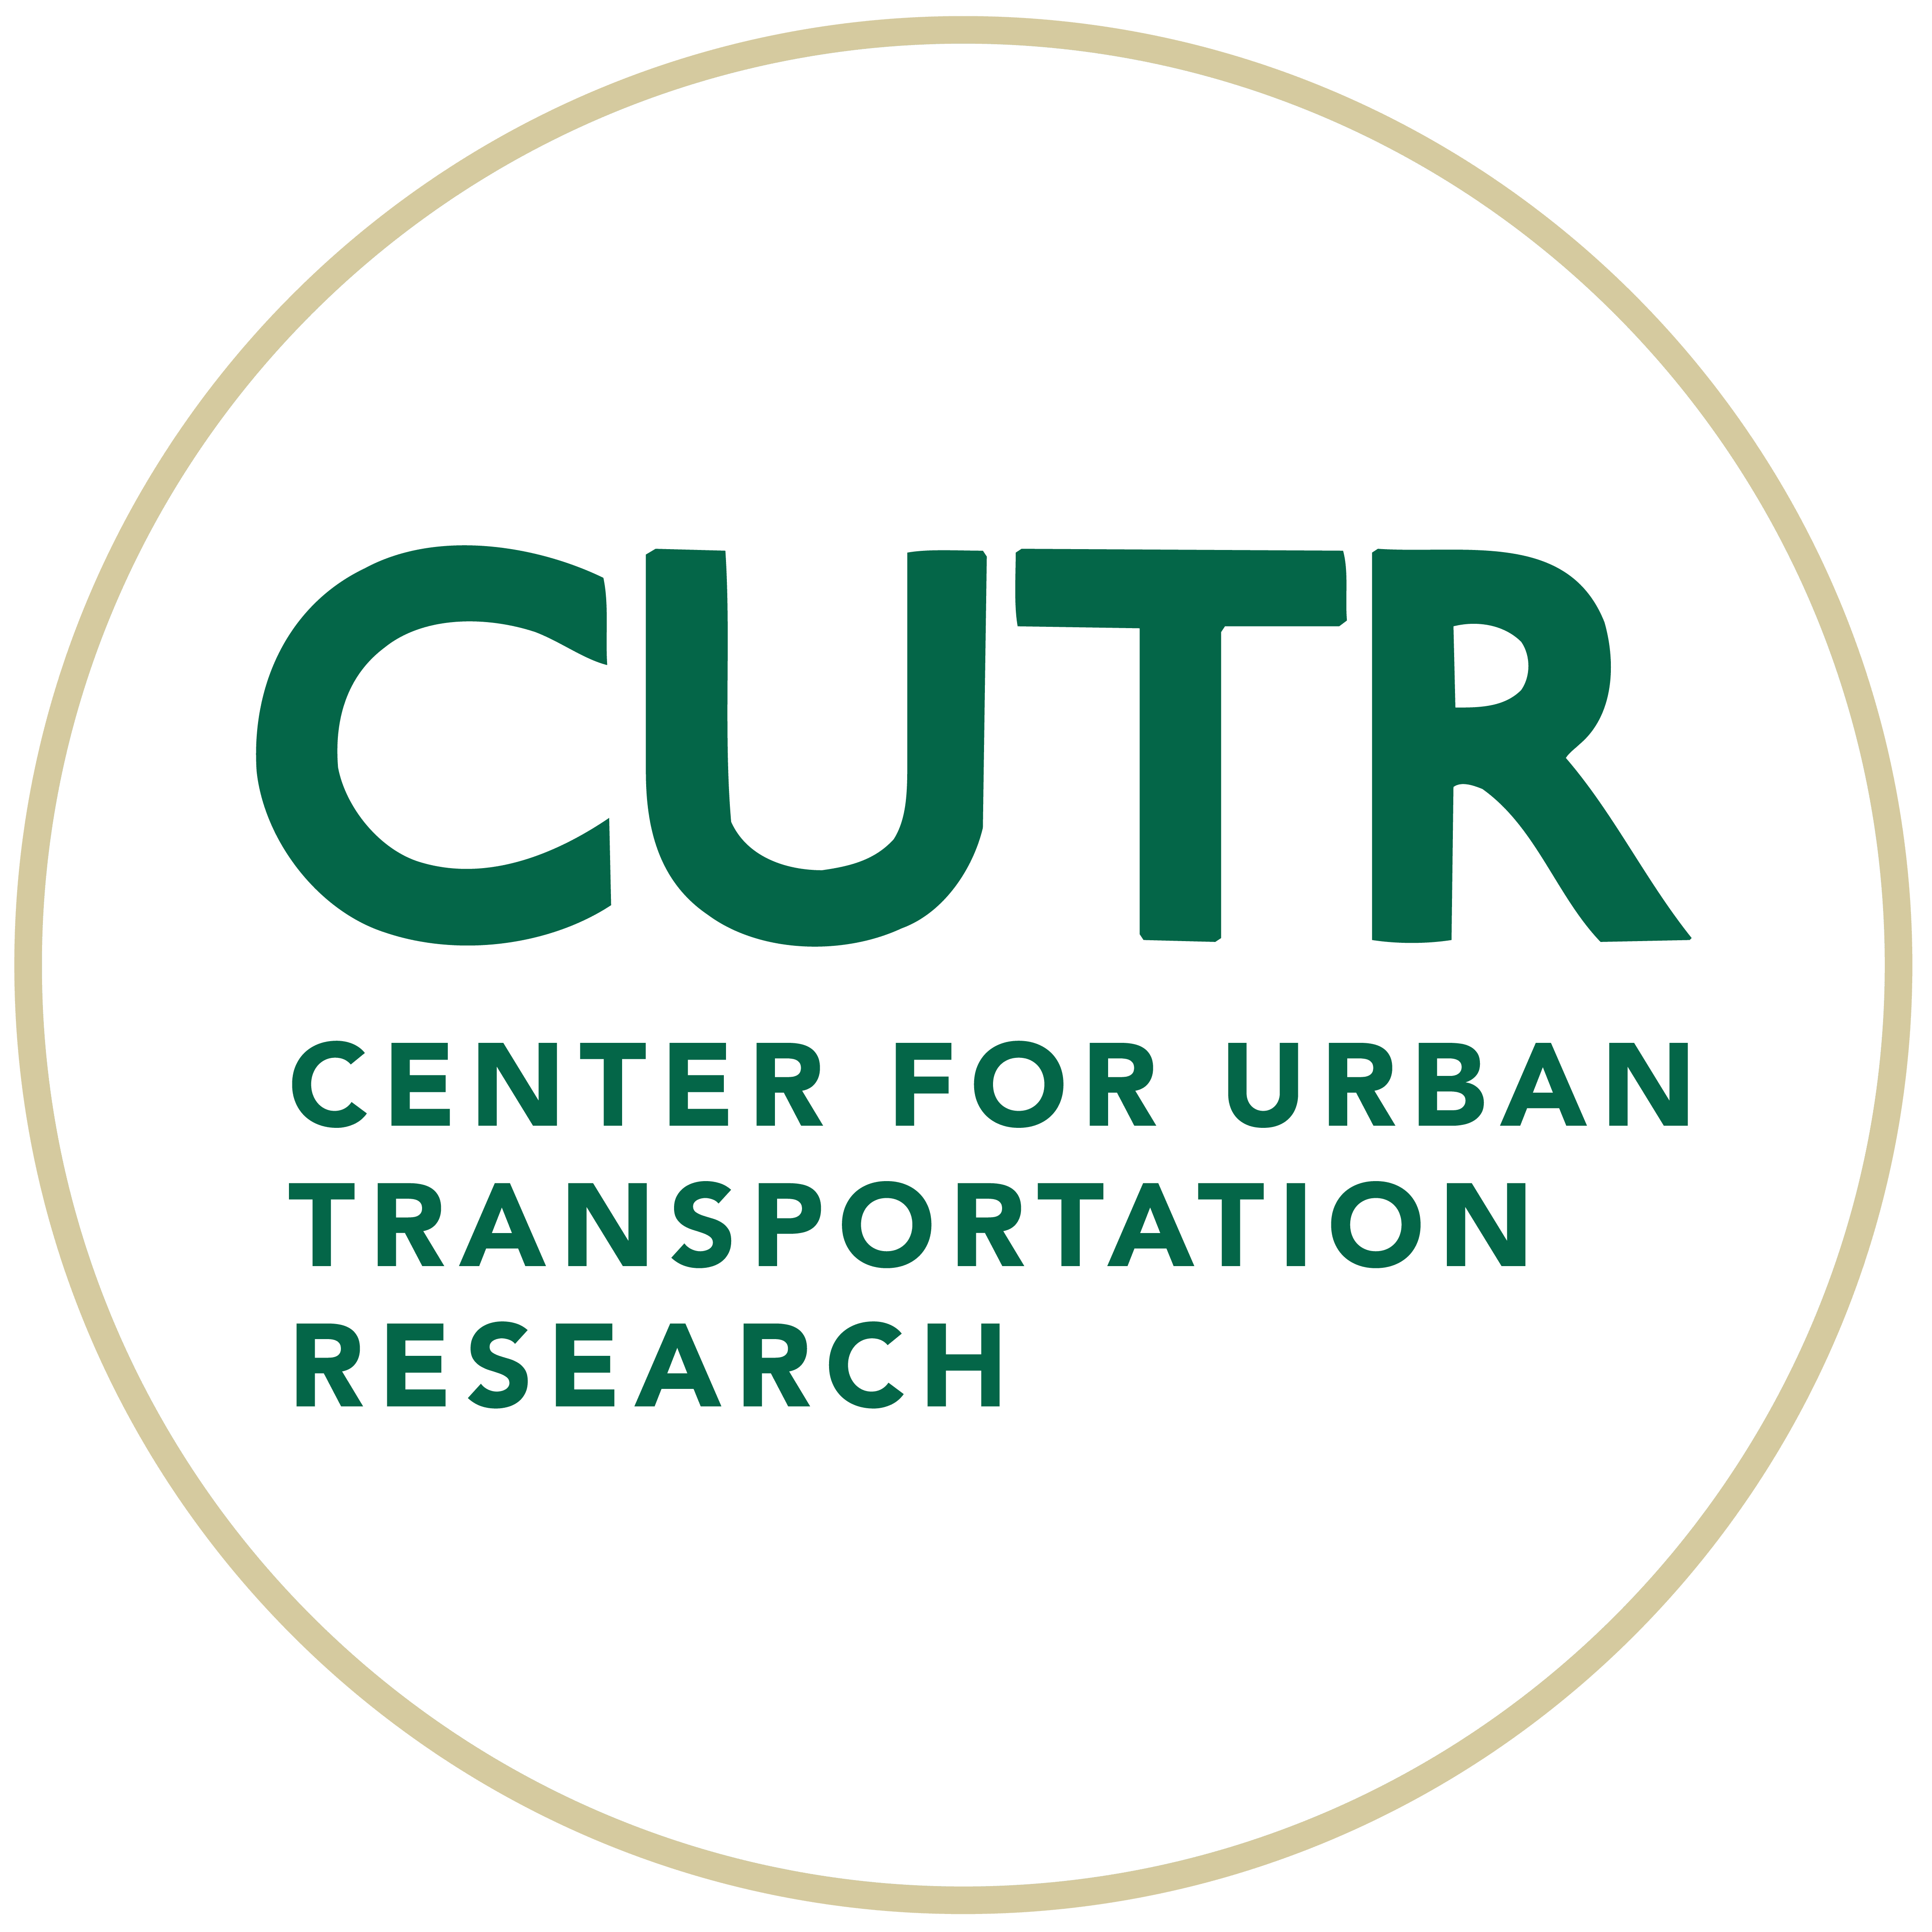 Center for Urban Transportation Research | University of South Florida